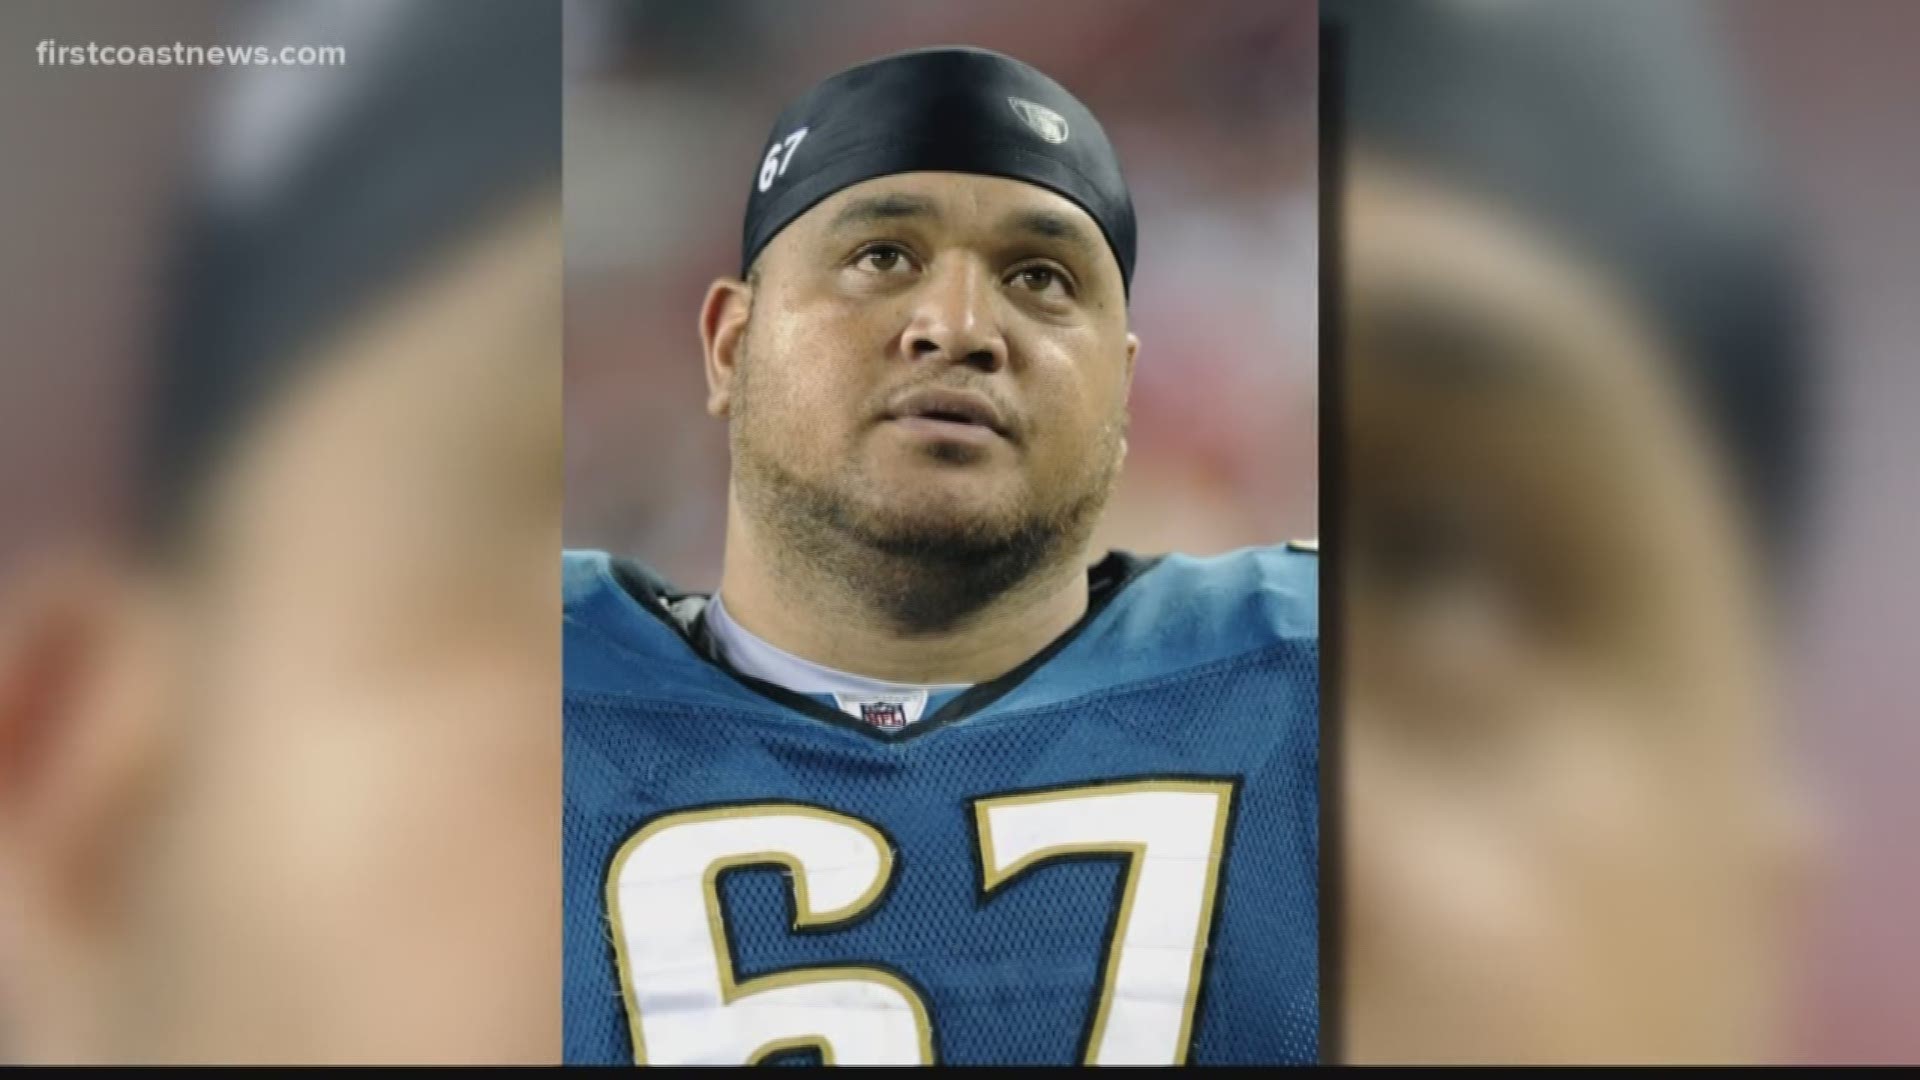 The Honolulu Medical Examiner's office determined that 38-year-old Vince Manuwai's cause of death was acute ecstasy intoxication.